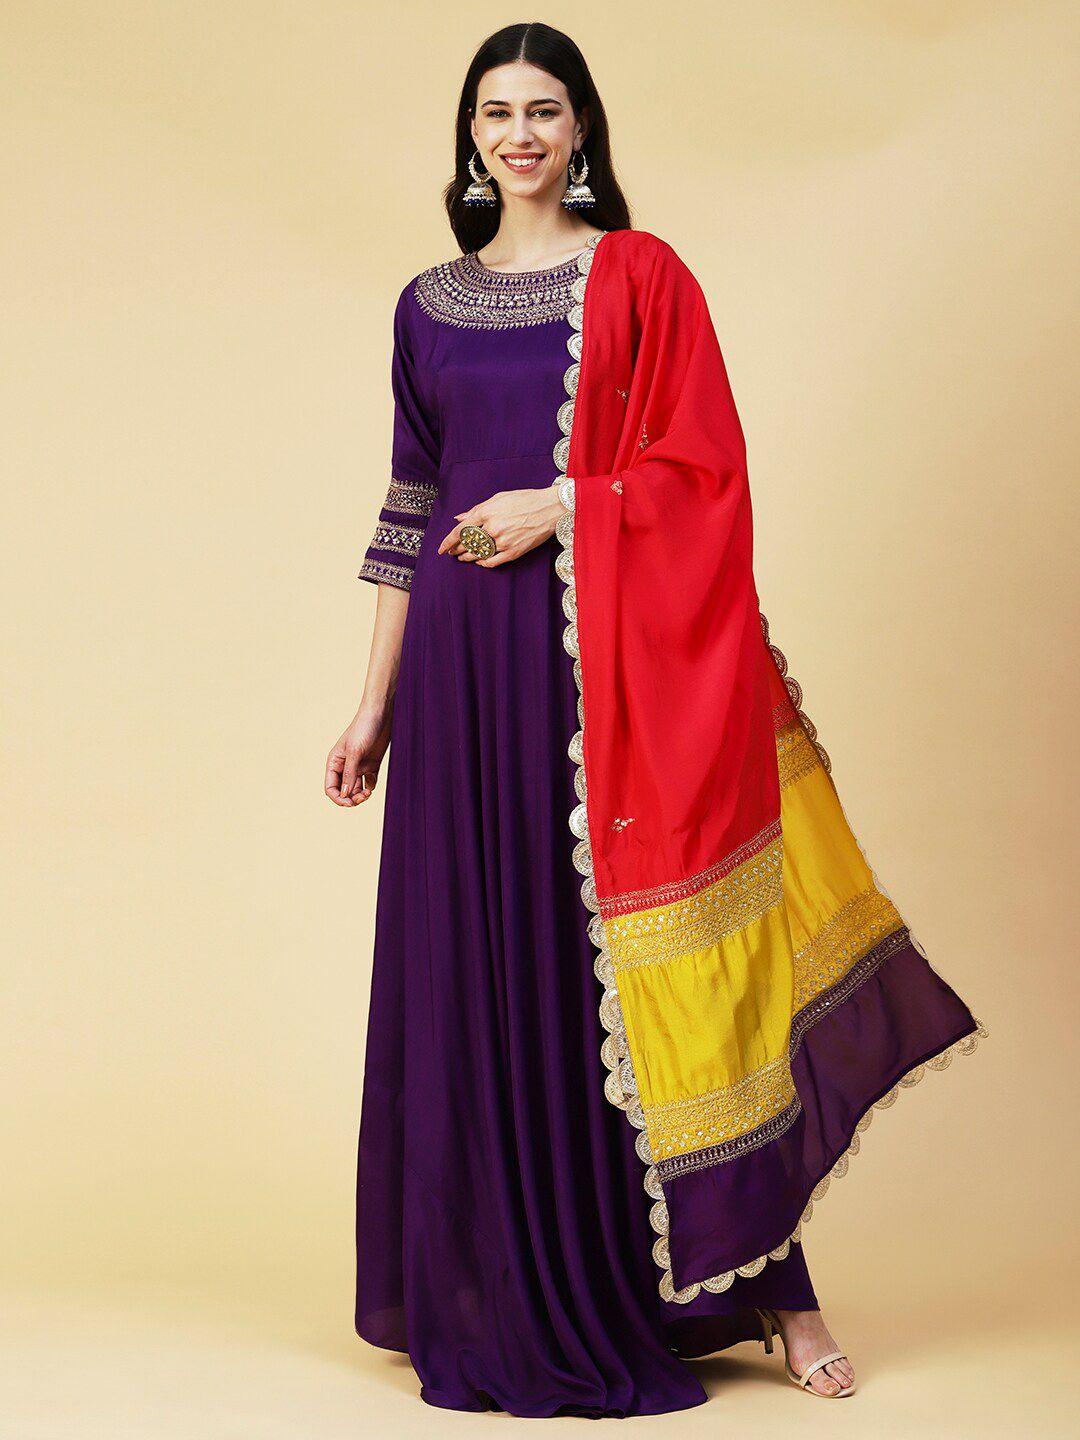 envy-me-by-fashor-embellished-maxi-dress-with-dupatta